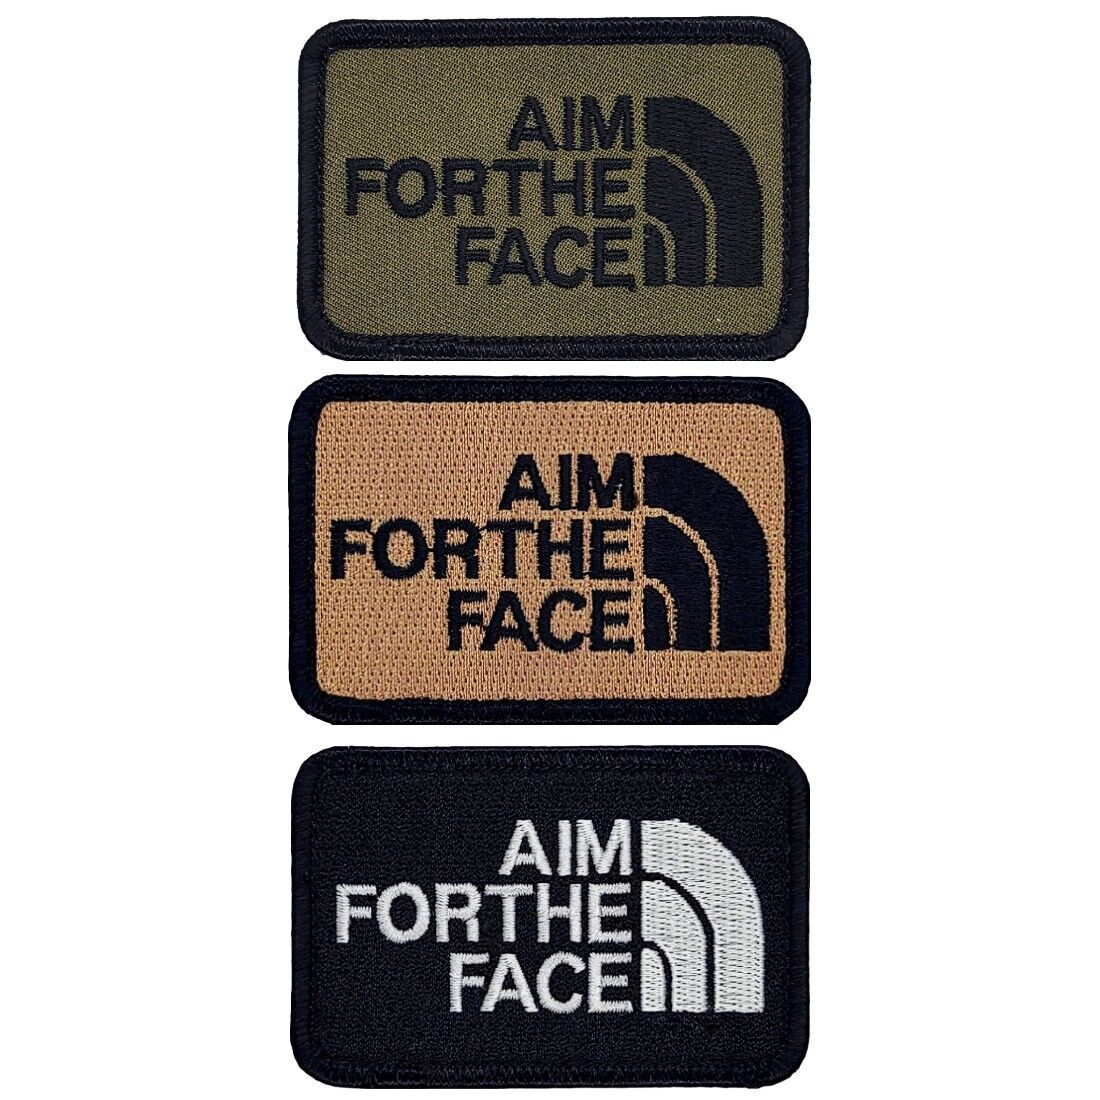 Aim for The Face Morale Patch  -3PC Bundle - 3 X 2 inch Hook Fastener